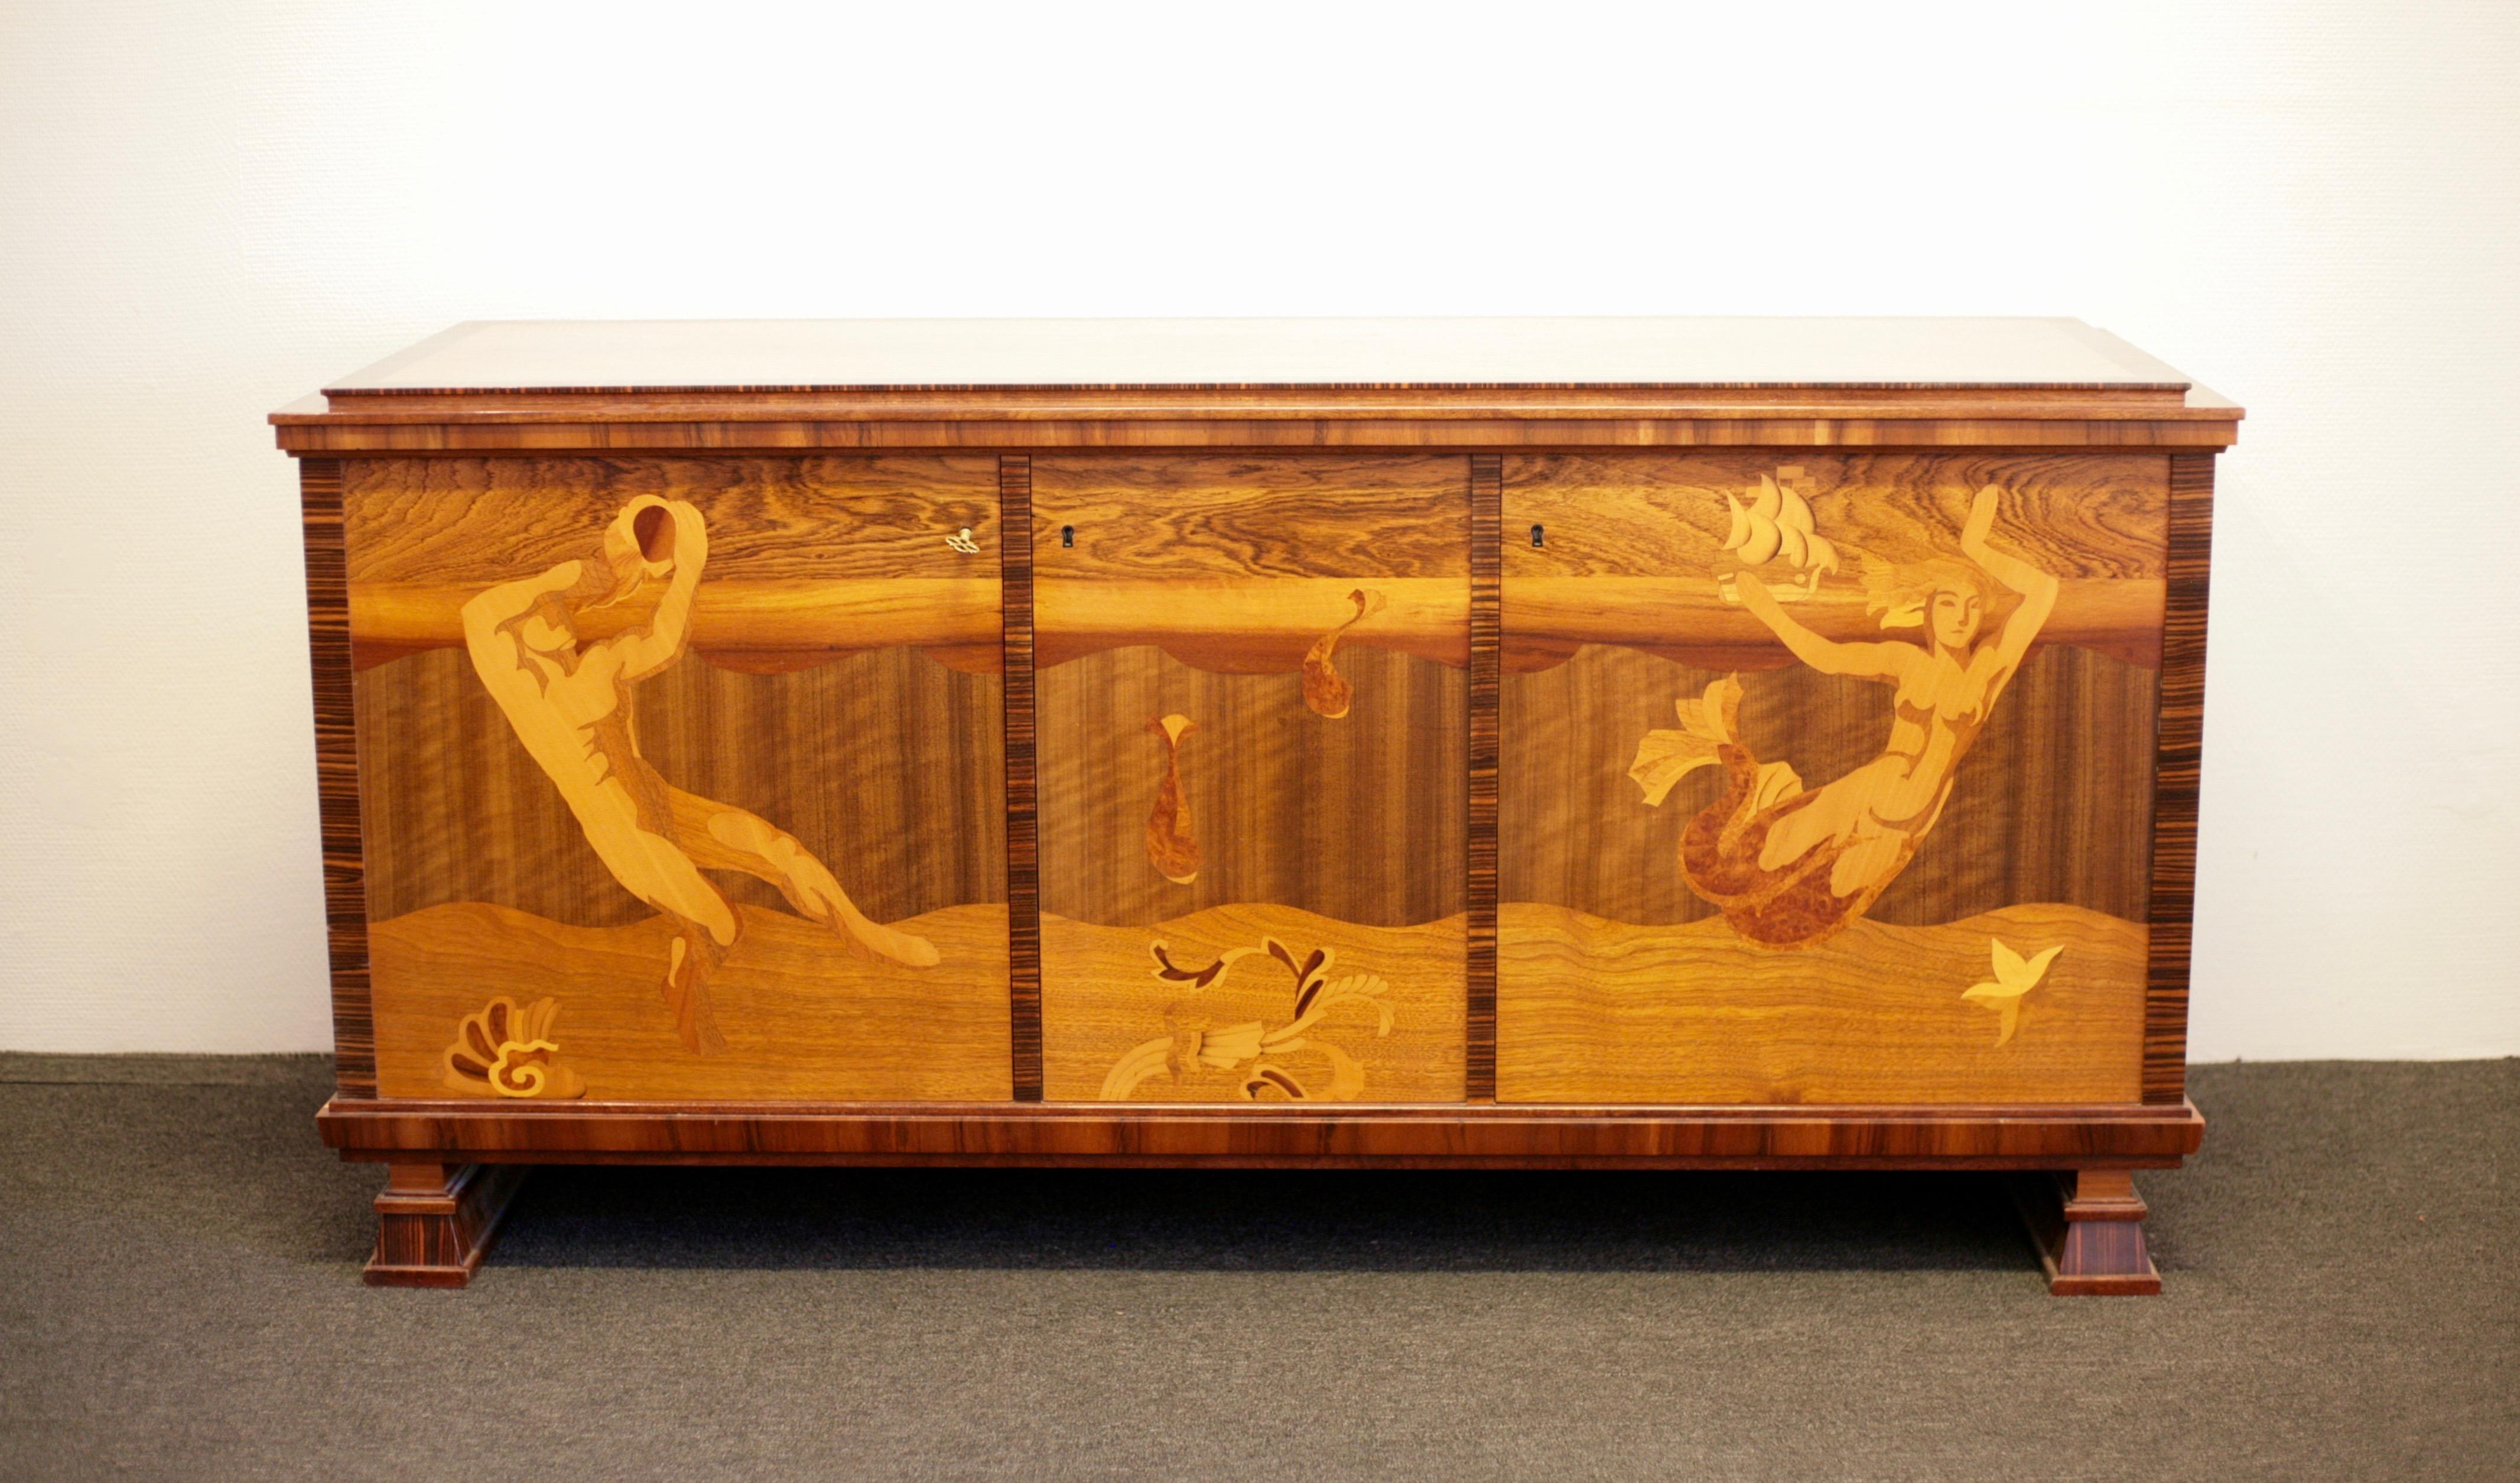 Exquisite Swedish Art Deco sideboard in the manner of Carl Malmsten. Rich with intarsia depicting Poseidon, a mermaid, two fish, seashells and a ship. Macassar veneer covering sides and back which is highly unusual. Makes it possible to place the